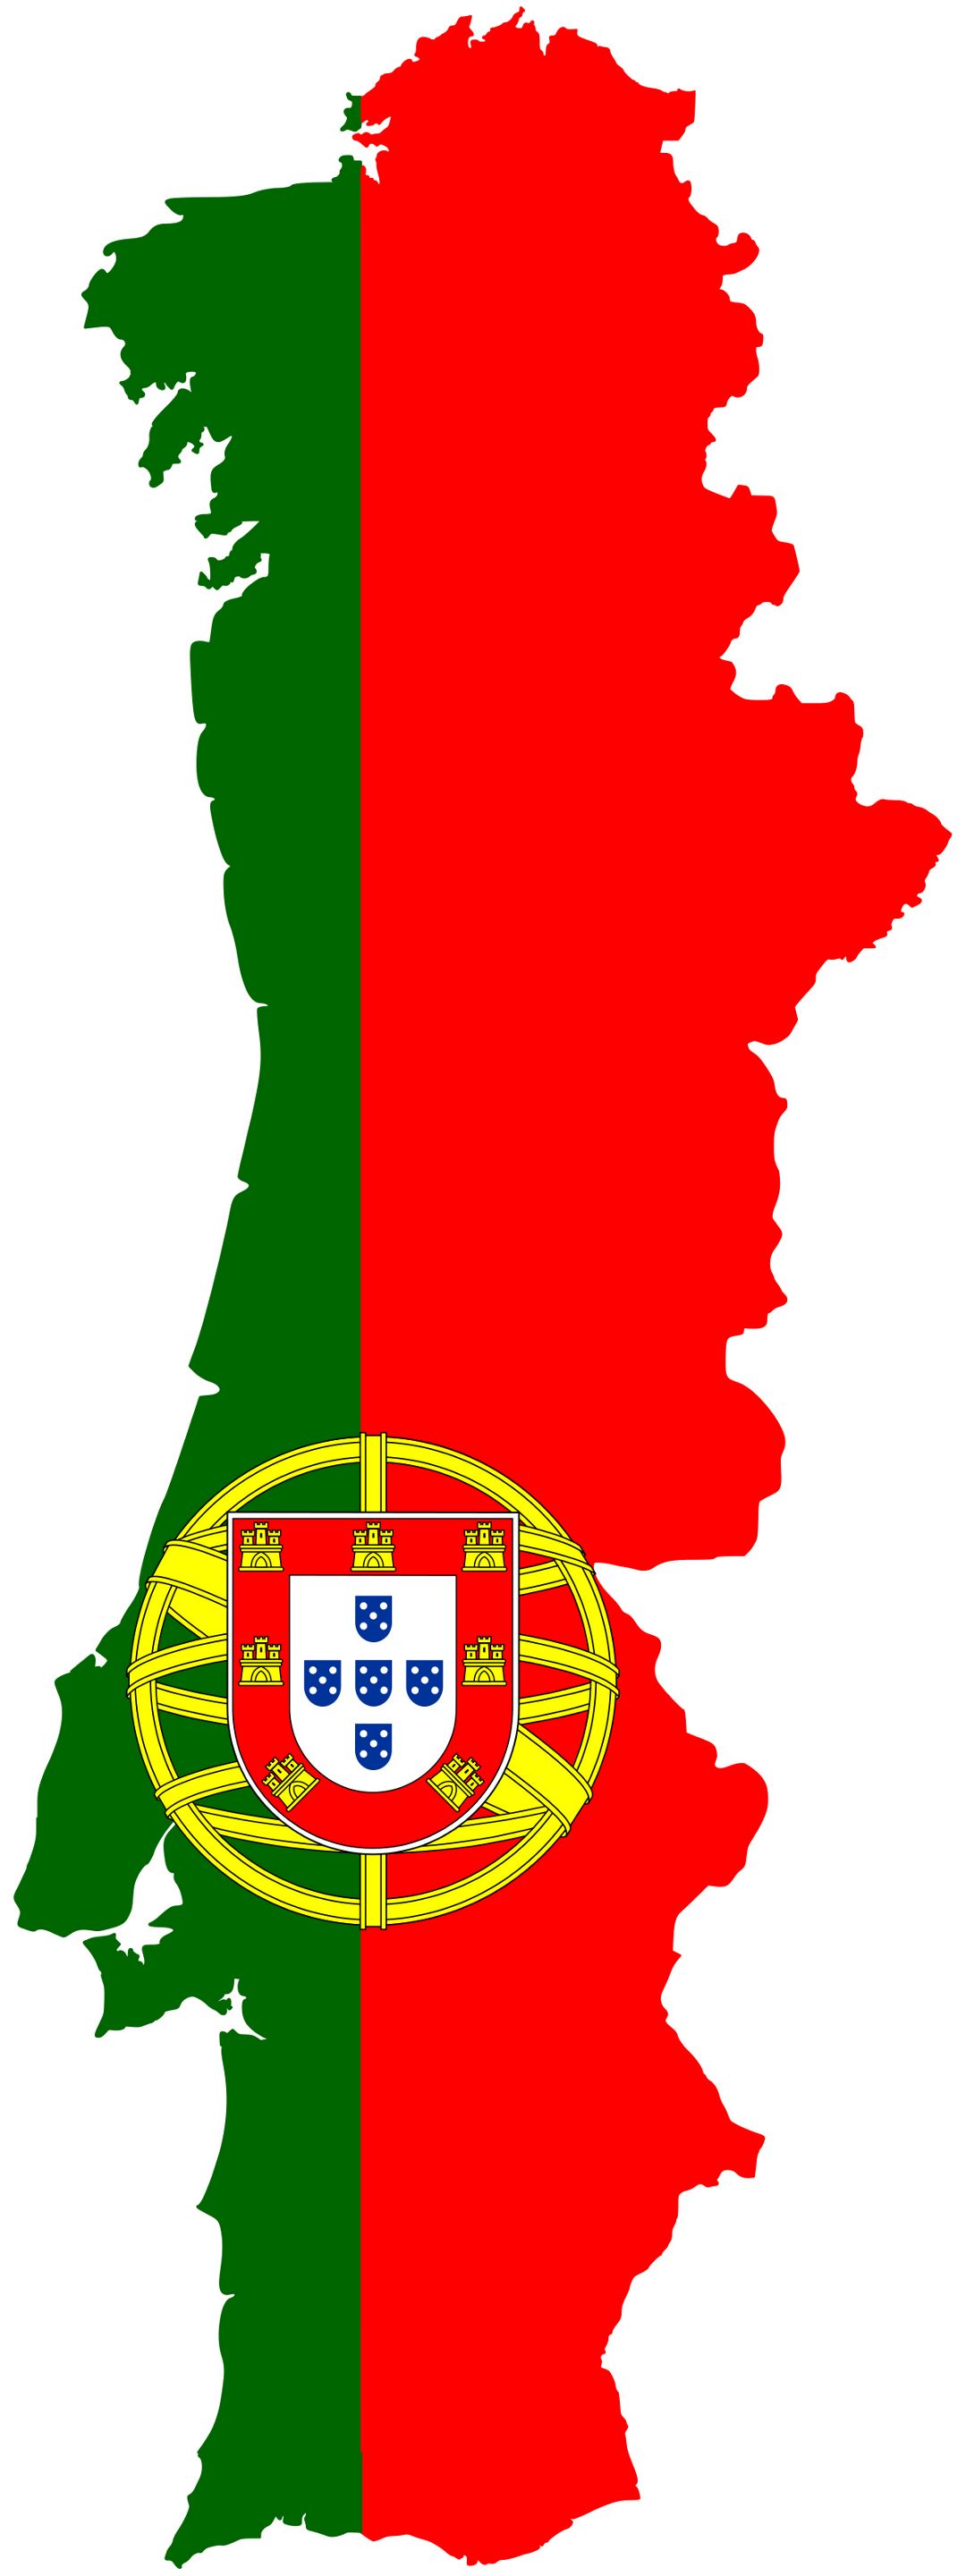 Large flag map of Portugal